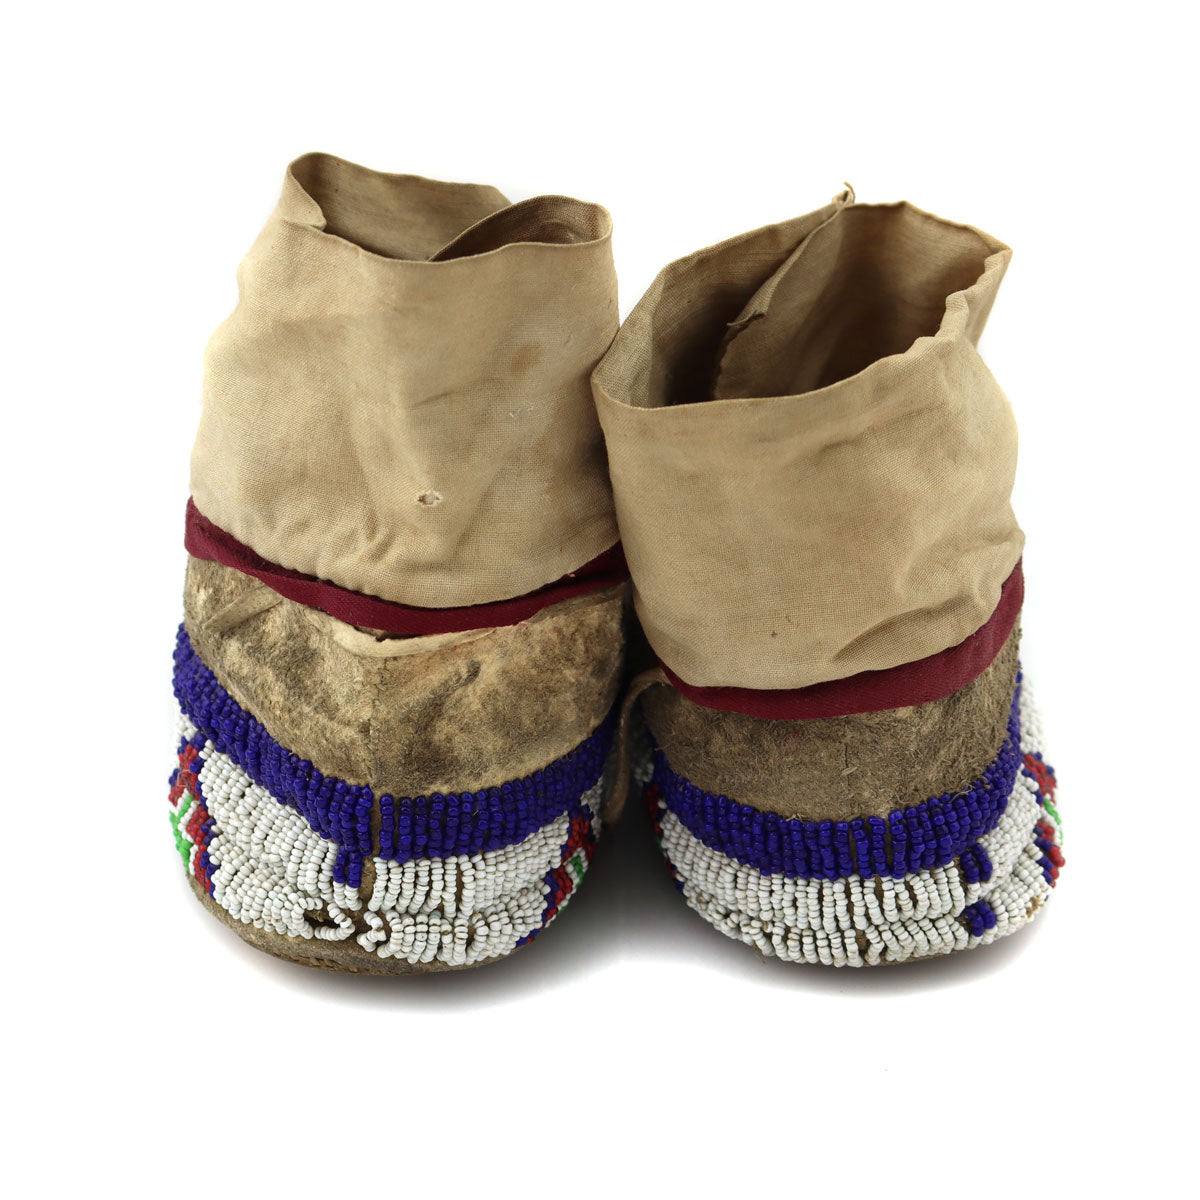 Sioux Beaded Leather Moccasins c. 1890s, 2.75" x 8.5" x 3.25" (DW91963-1021-019)3